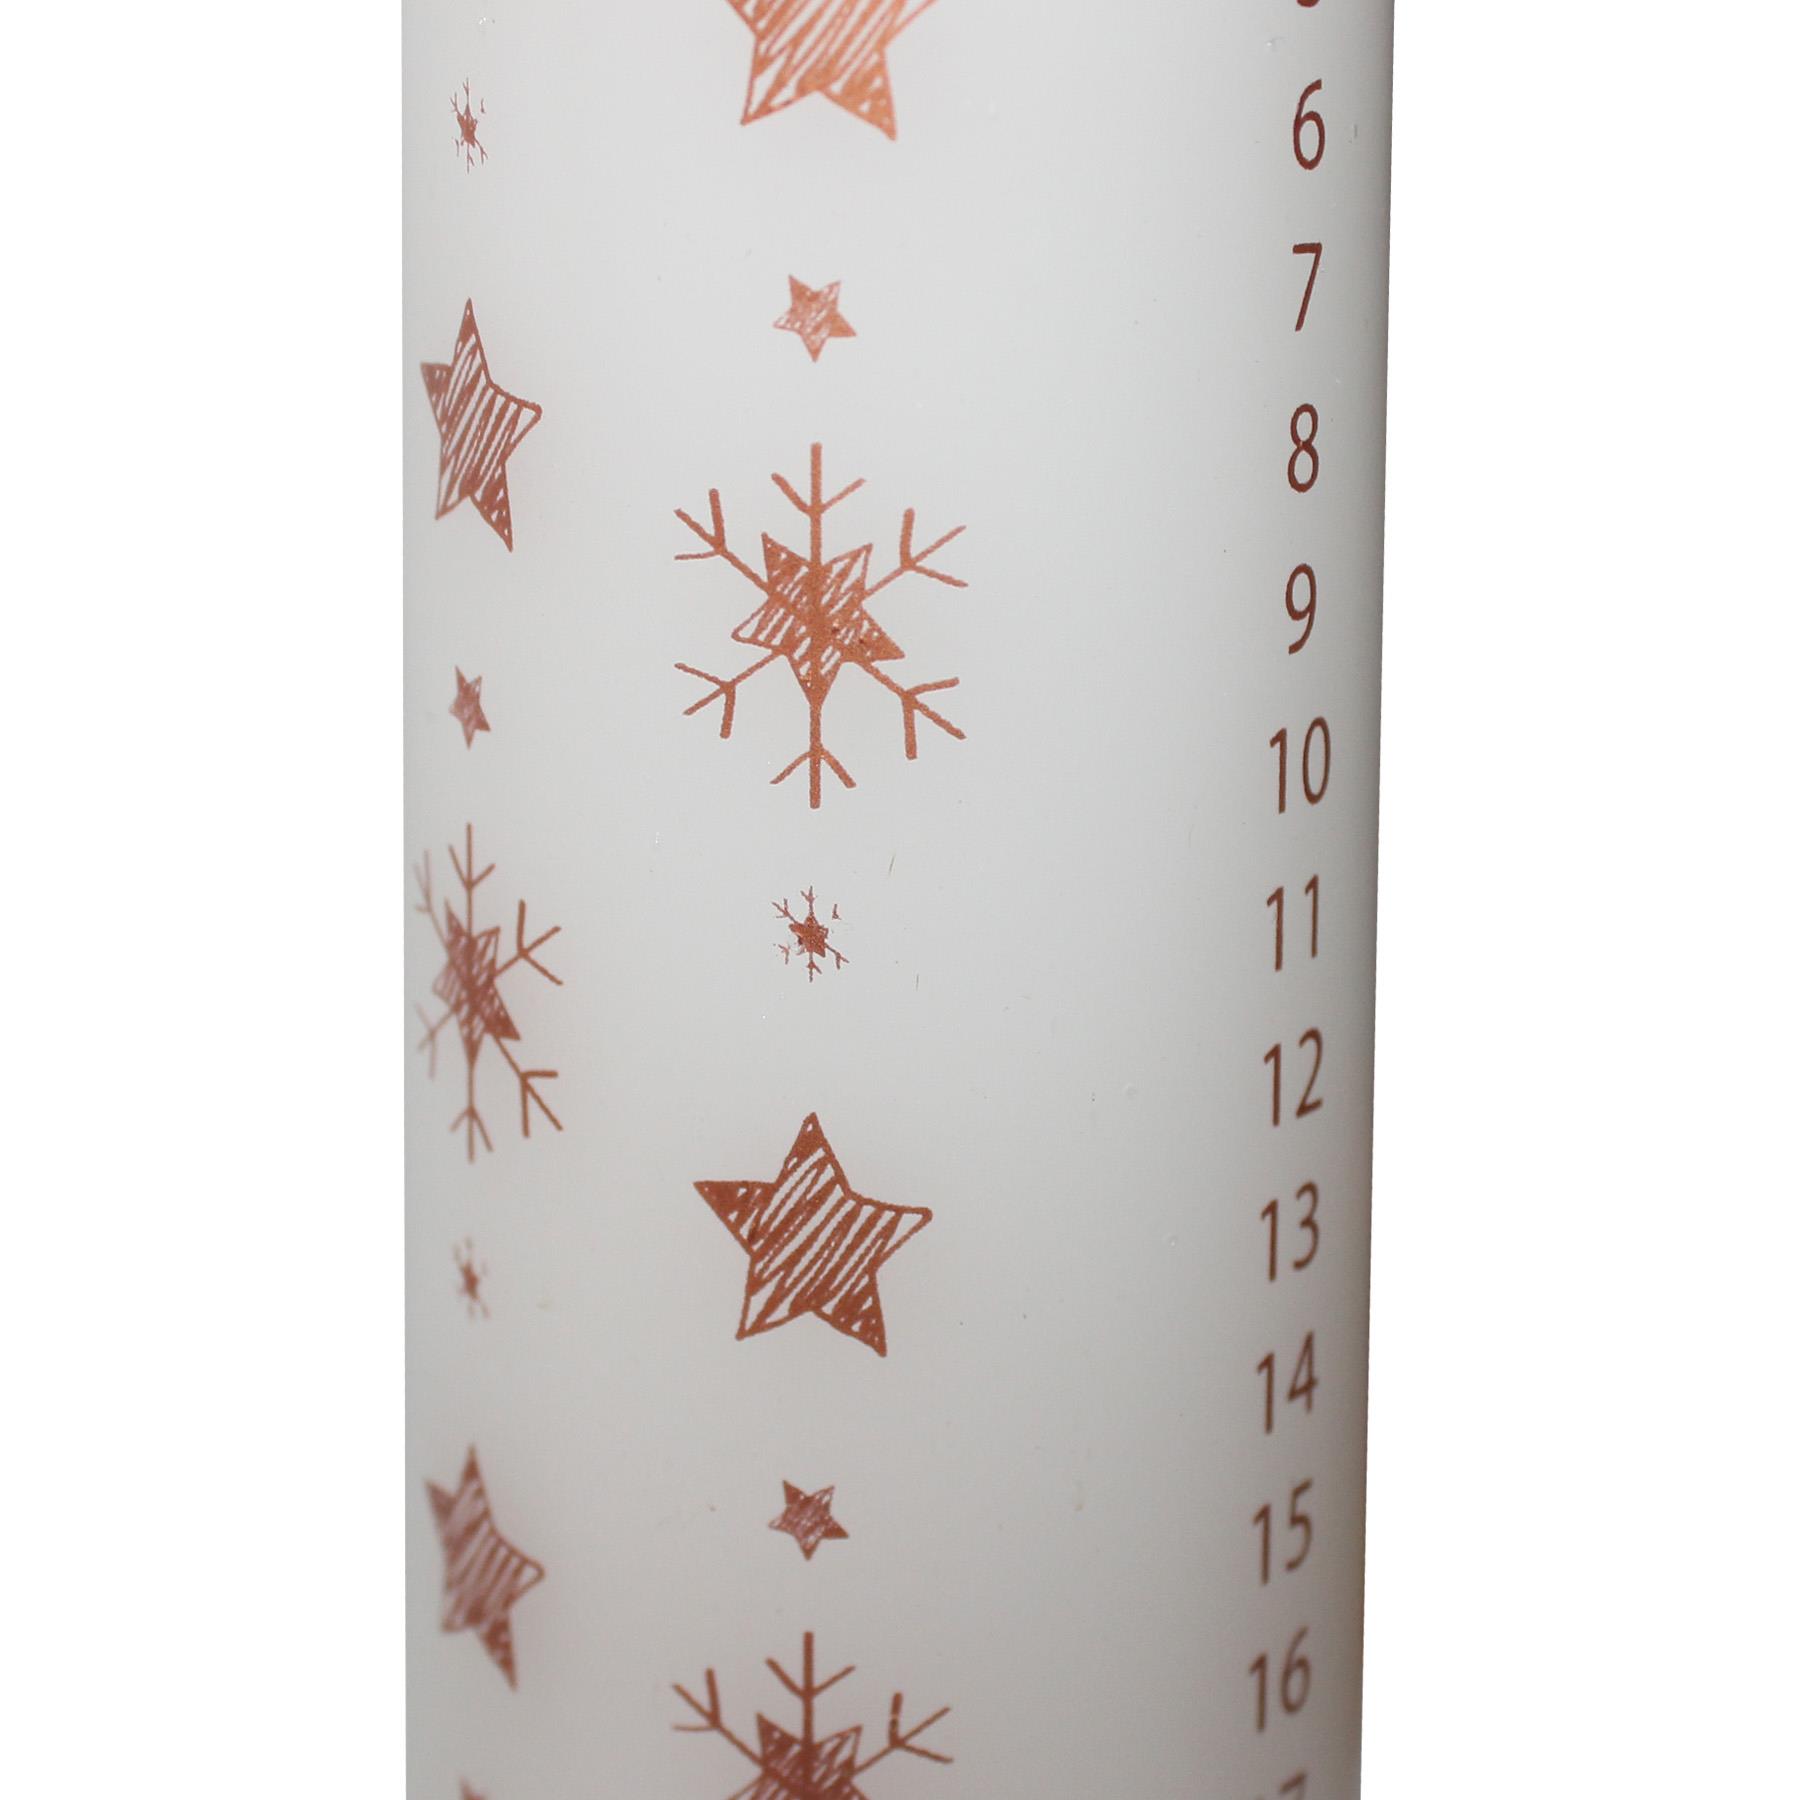 20cm Christmas Advent Candle with Snowflake Image on Glass Tray - White / Rose Gold